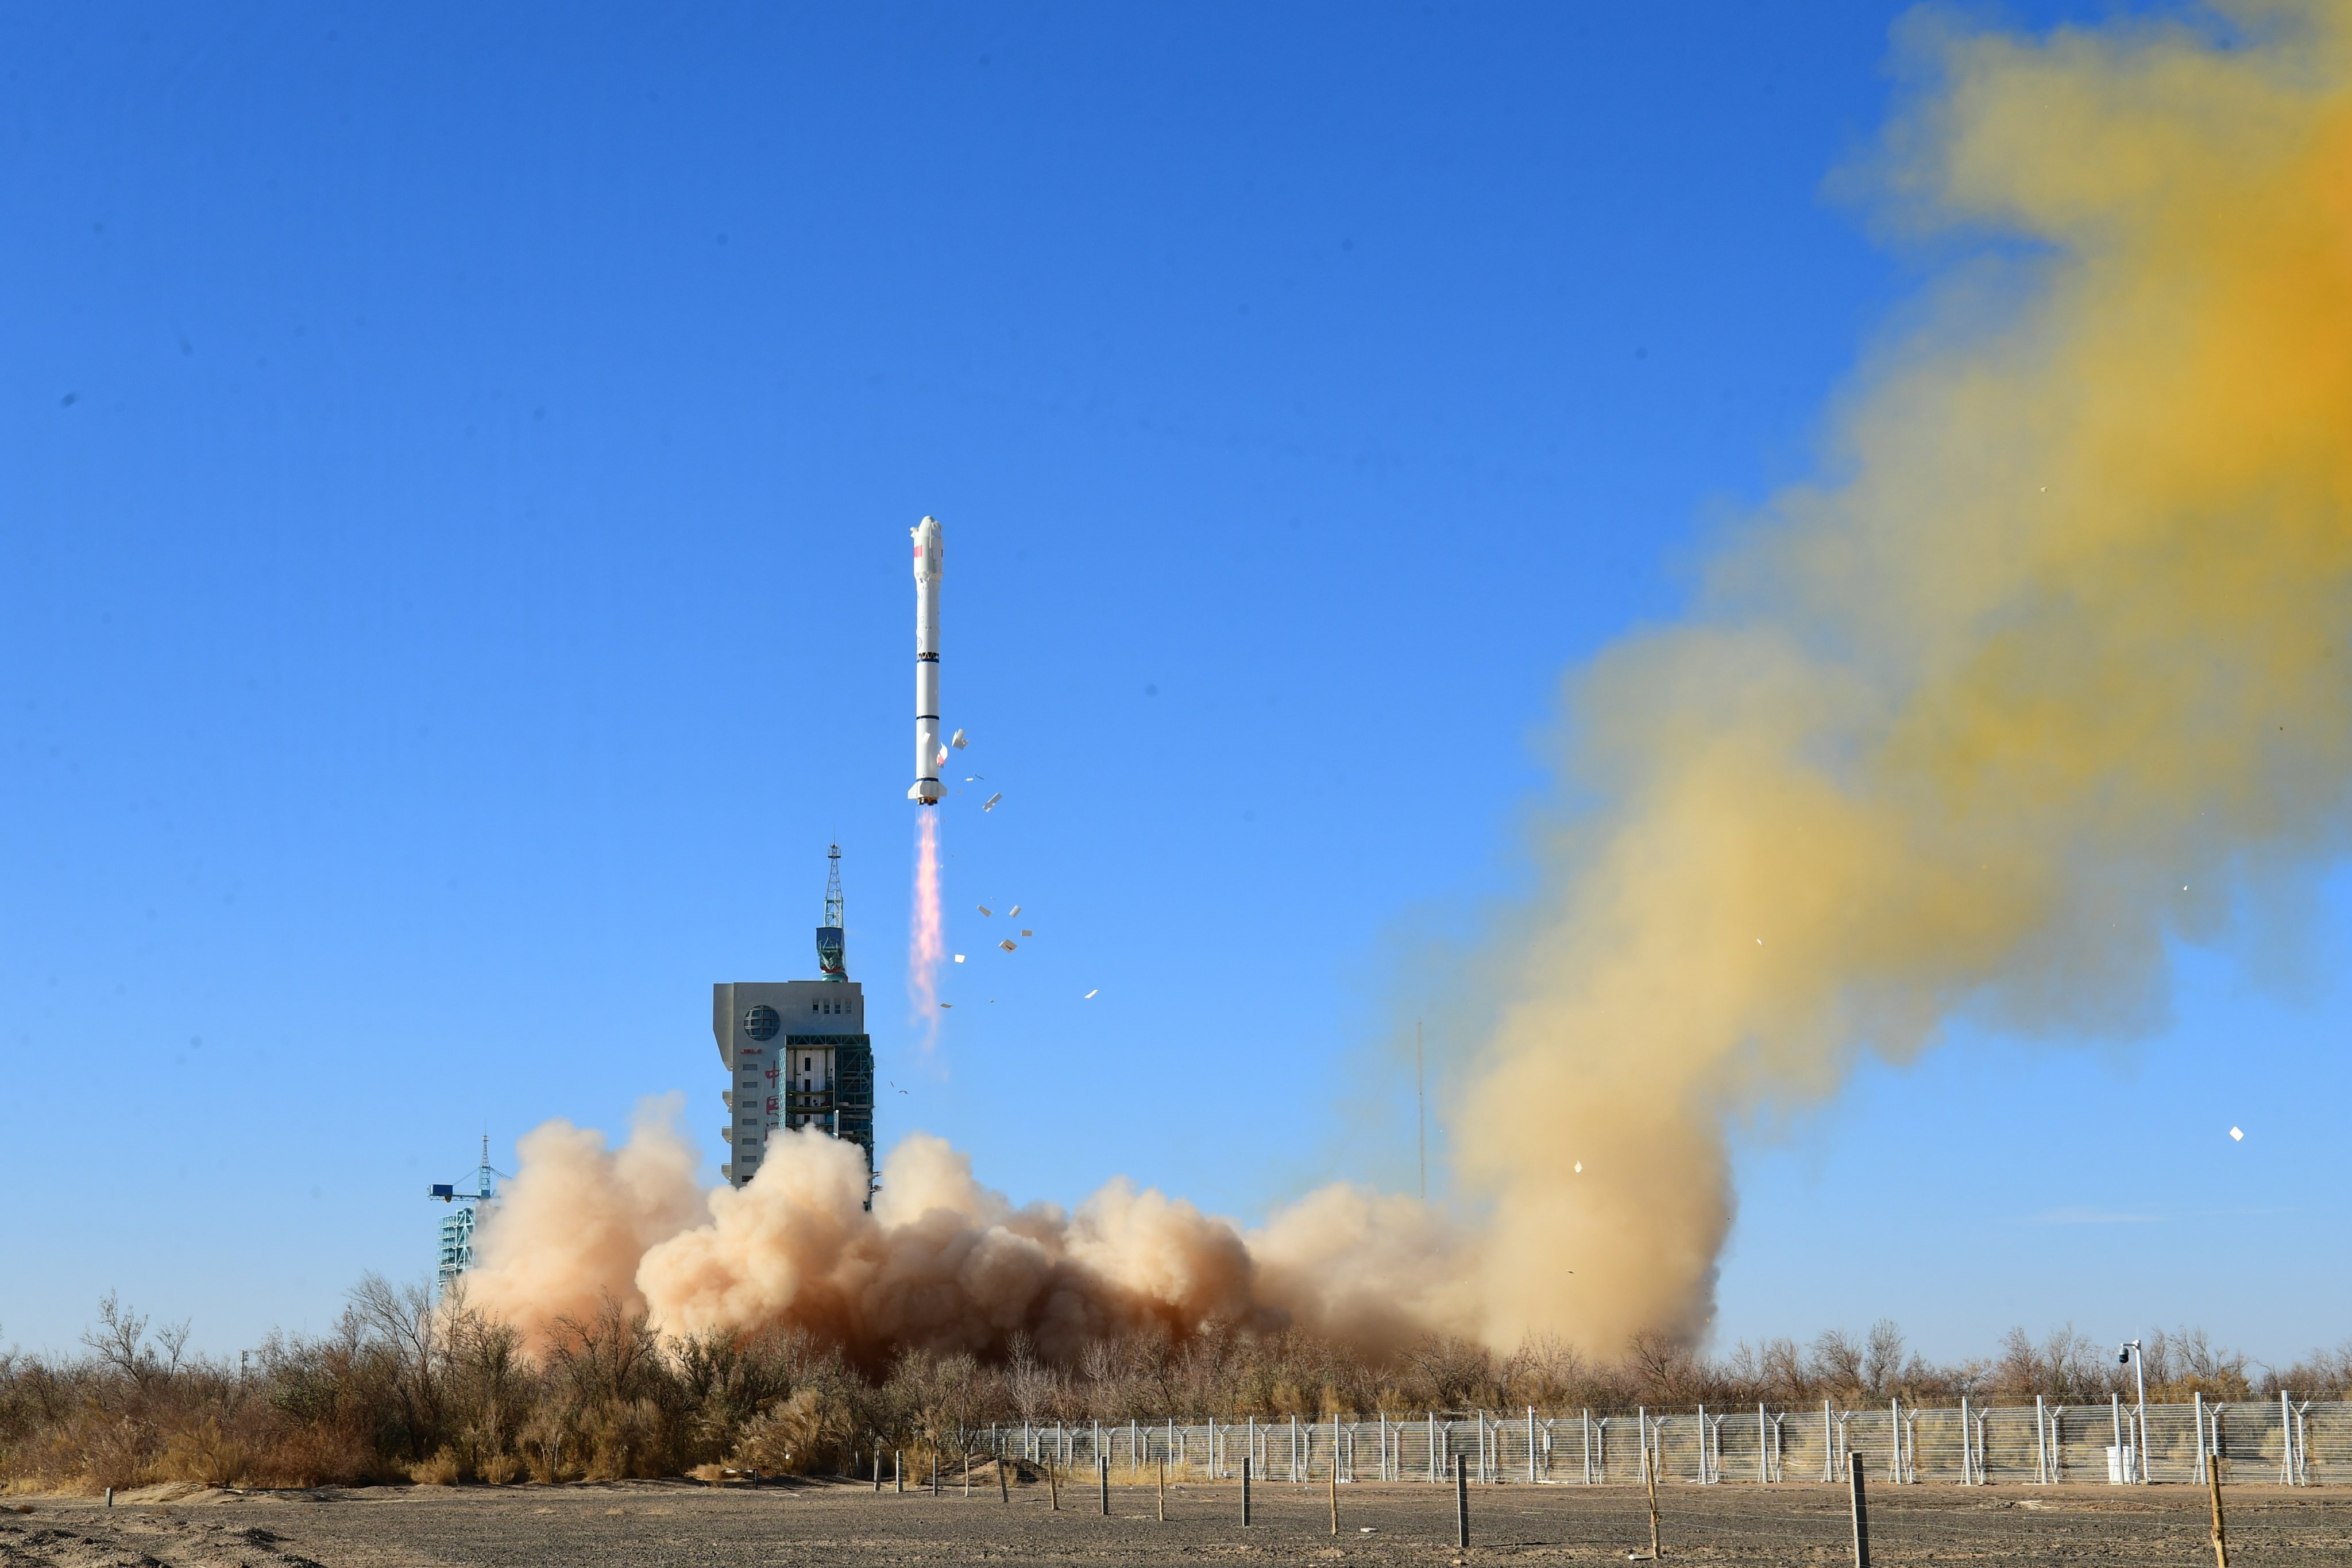 A Chinese Long March-2C rocket carries Egypt’s MISRSAT-2, blasting off from the Jiuquan Satellite Launch Centre in northwest China on December 4. Days later, China and Egypt signed an agreement to work together on China’s lunar station. Photo: EPA-EFE/Xinhua